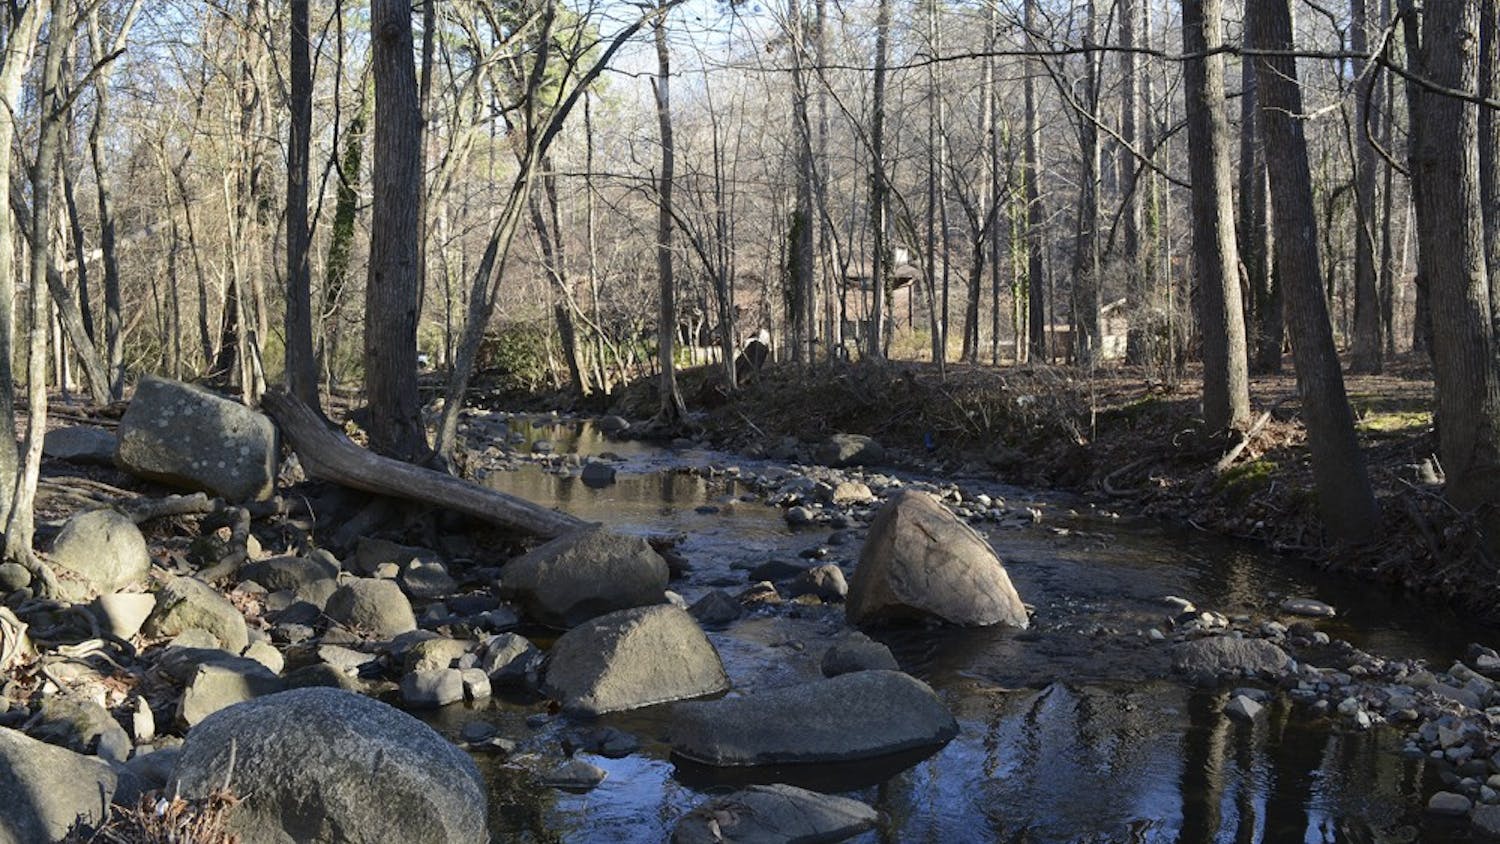 Bolin Creek weaves alongside the trails, with neighborhood homes visible in the background. 